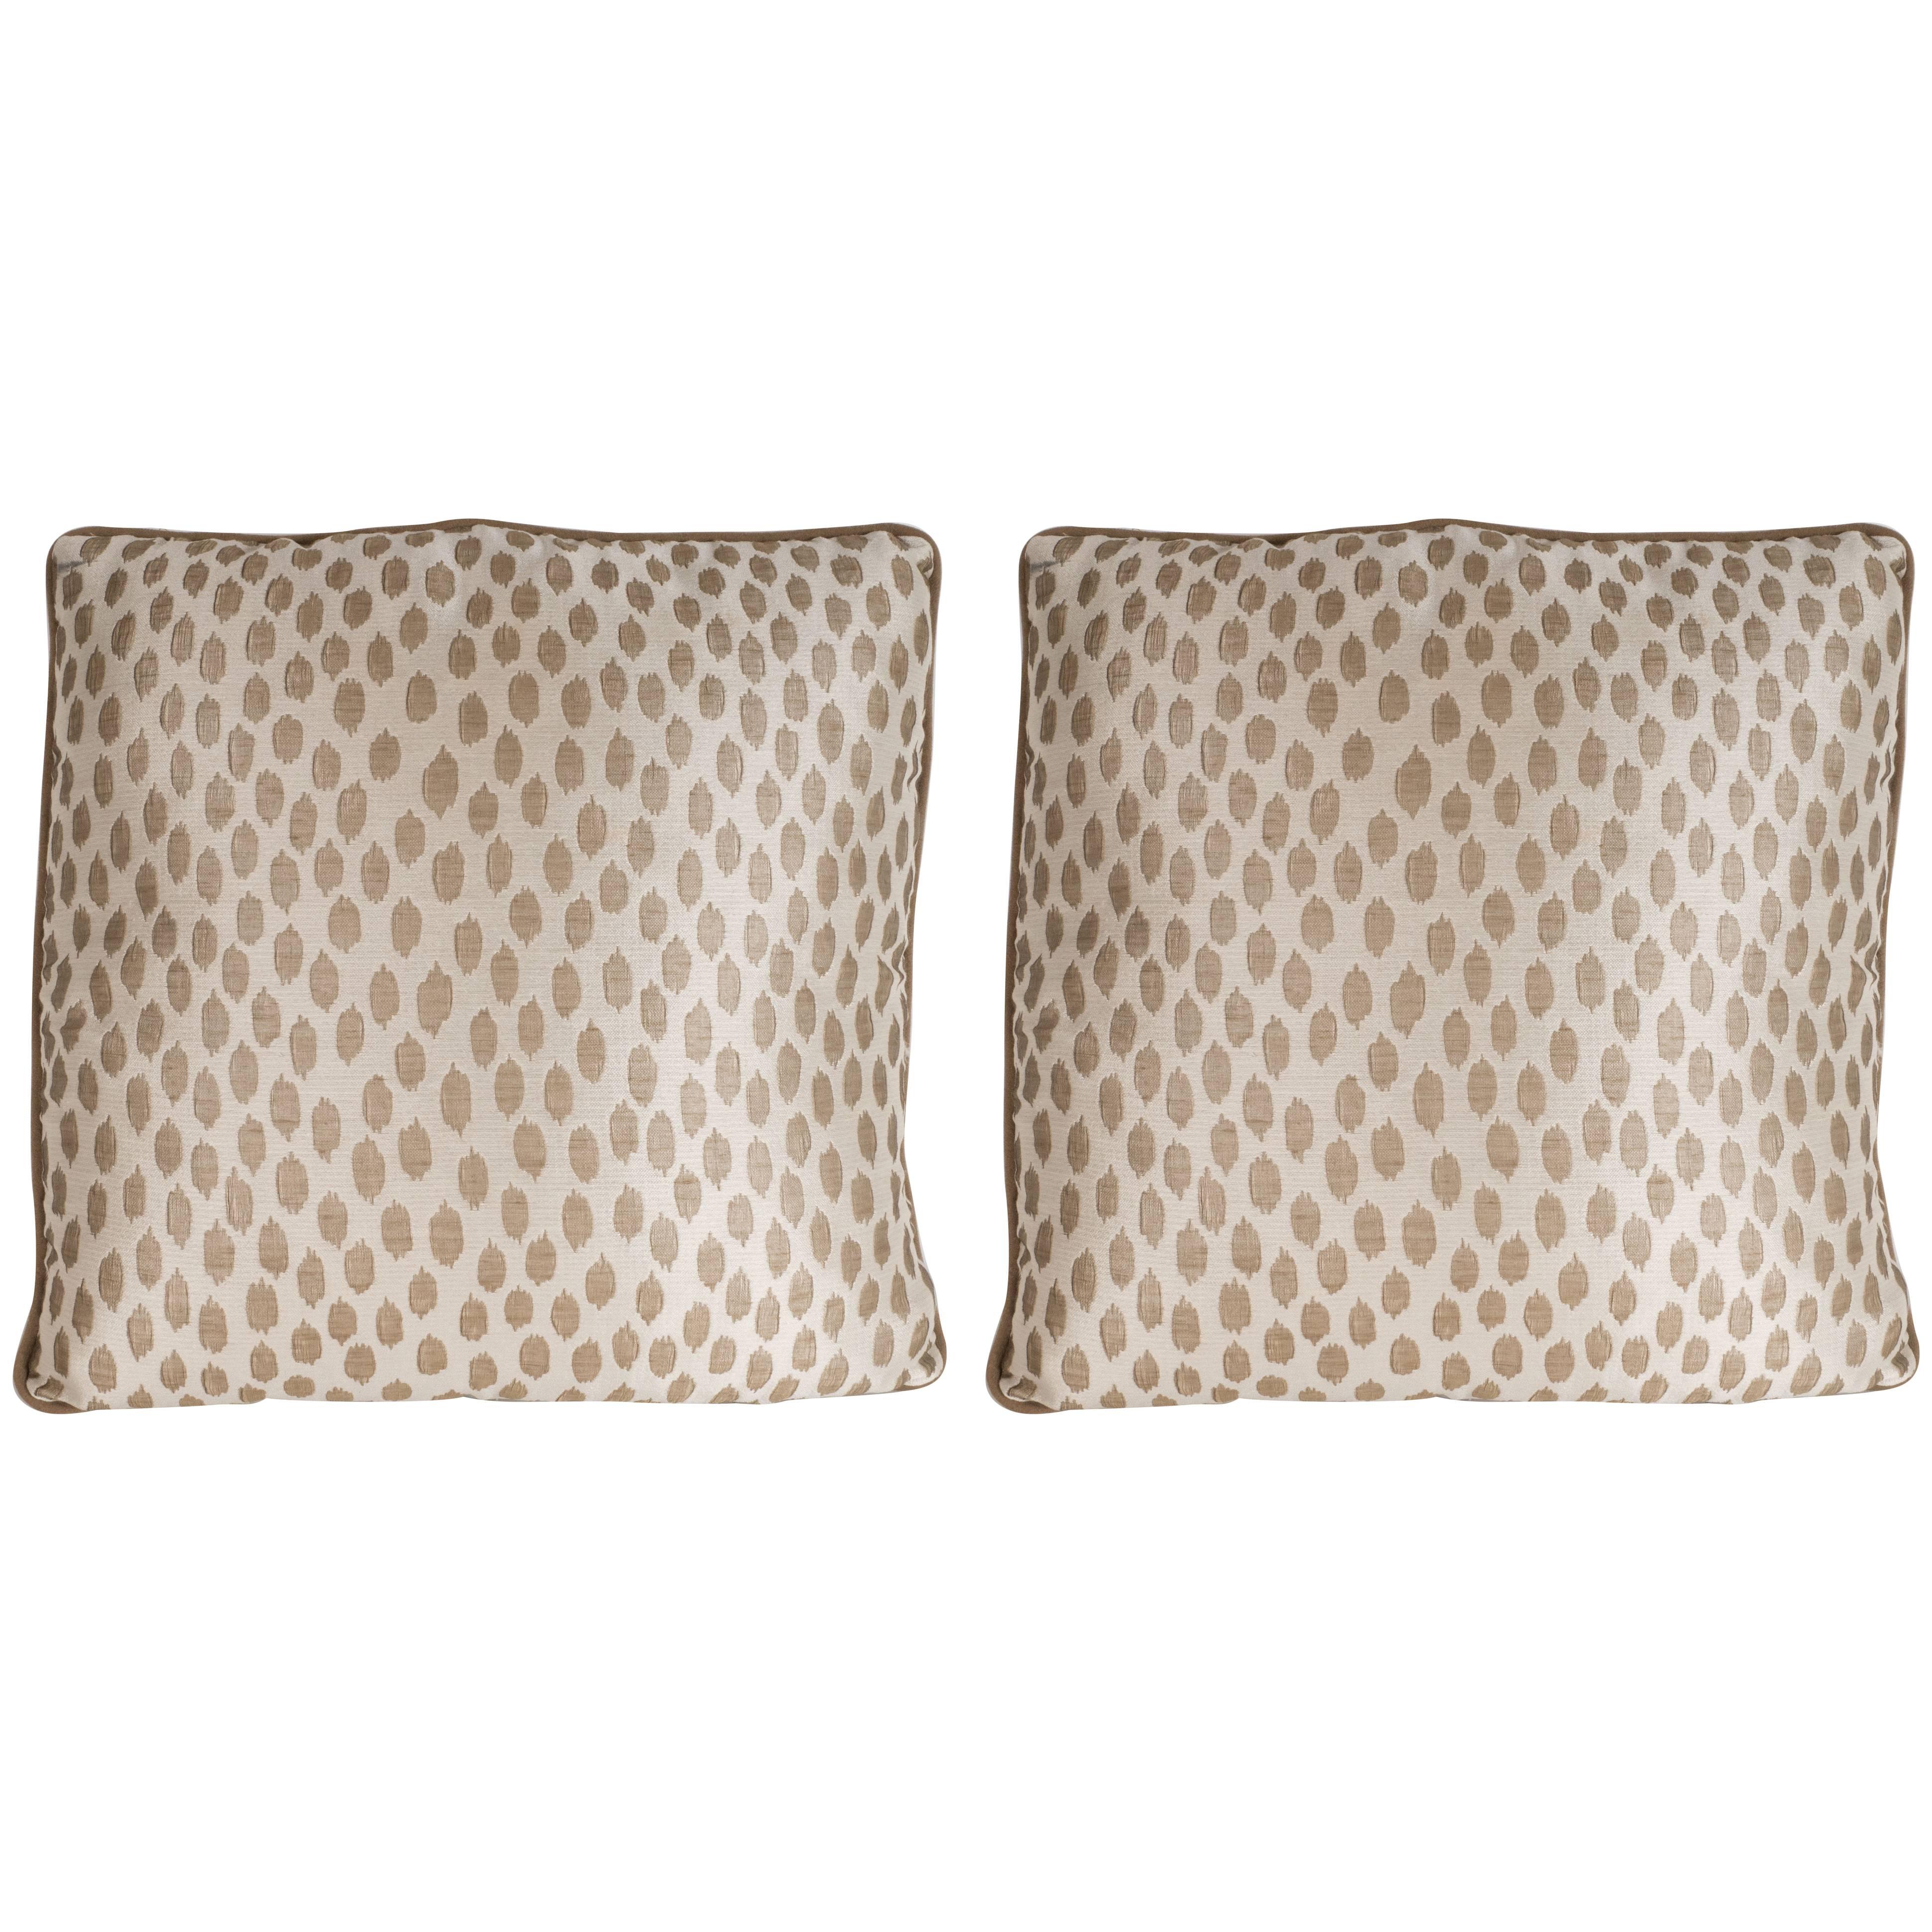 Pair of Modernist Square Pillows in Ecru & Muted Gold Tones with Piping Details